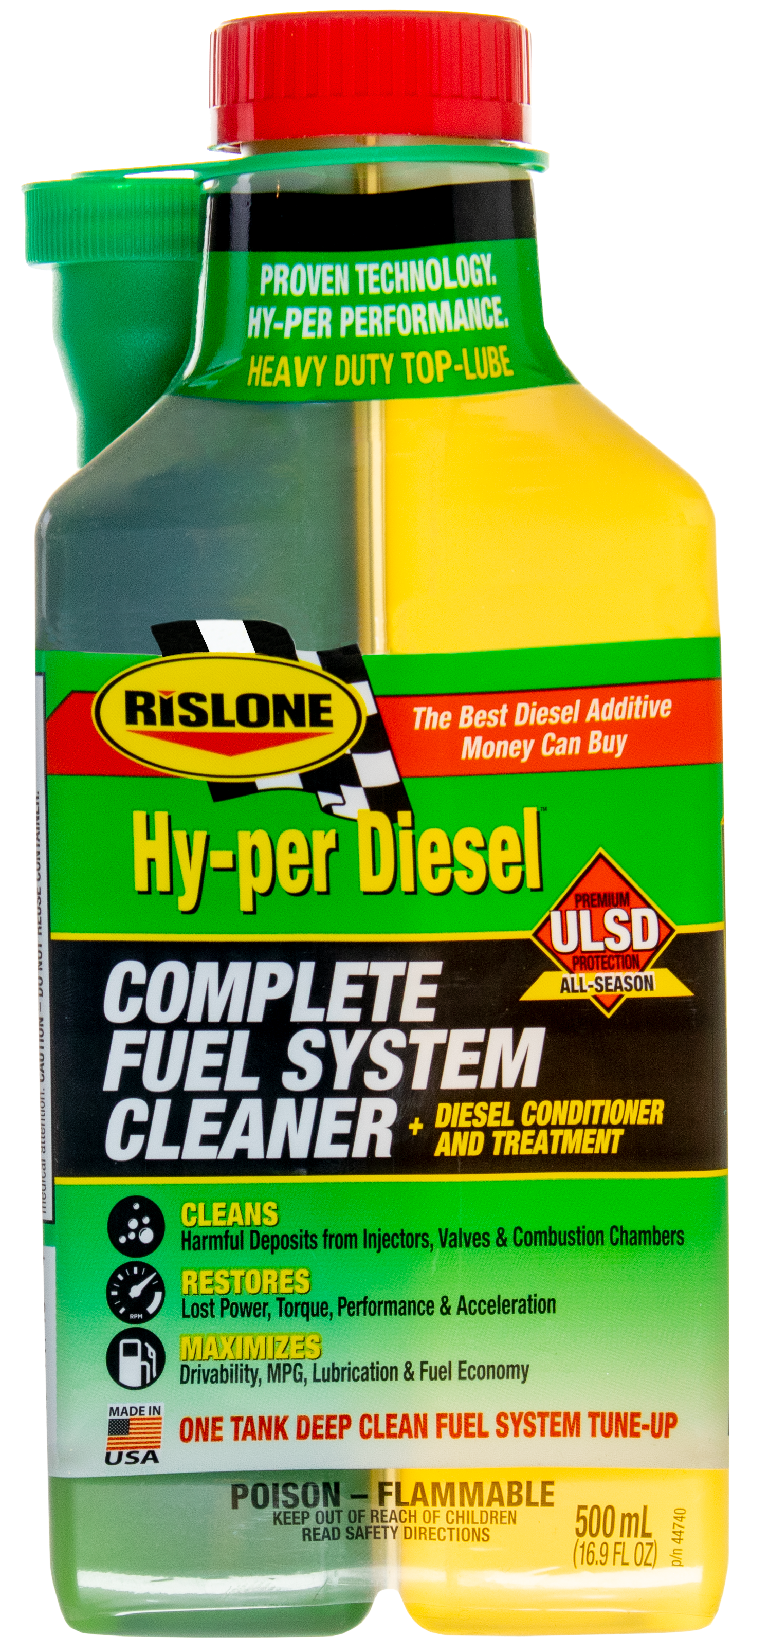 Power Service Diesel Clean 32 oz - Diesel Fuel Cleaner & Injector Cleaner -  Restores Power & Fuel Economy - With Lubricator - Car Additives & Fluids in  the Car Additives 